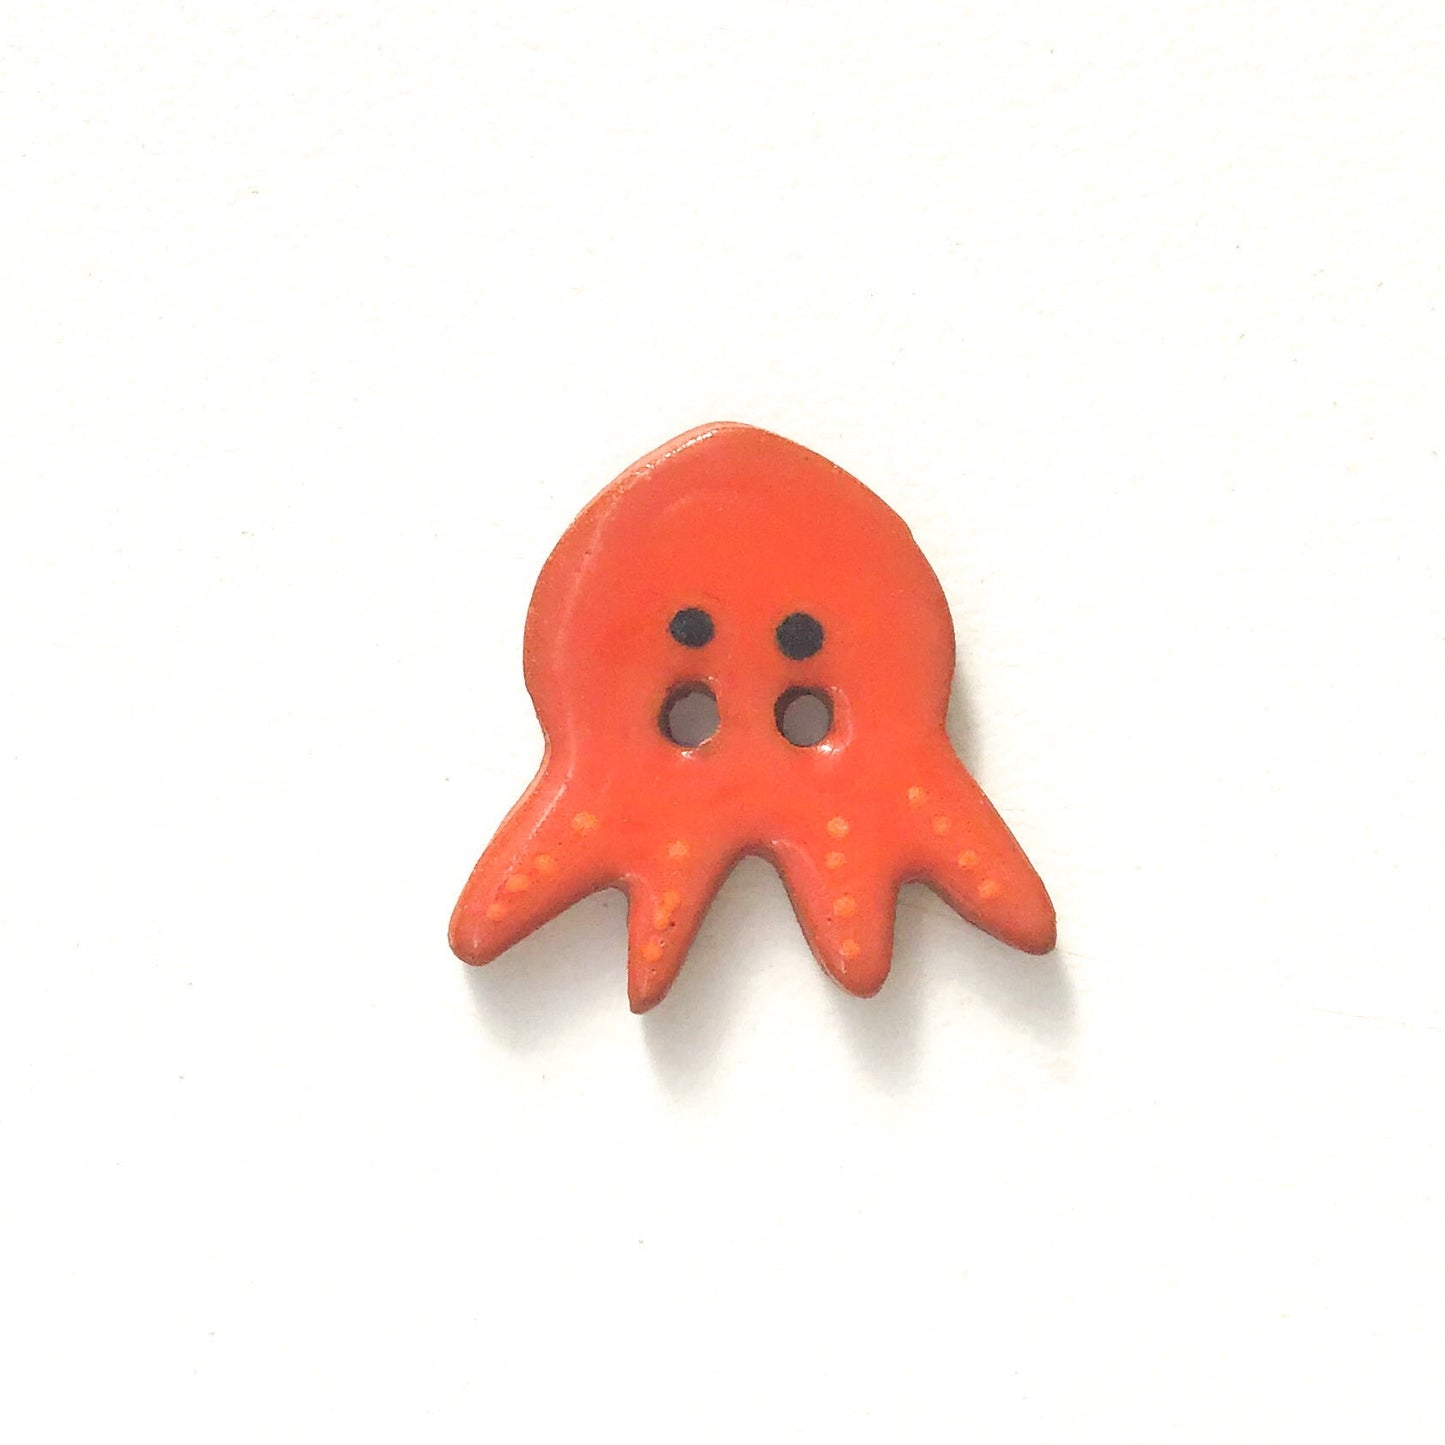 (Wholesale Accounts Only) 3/4" Earth Tones Octopus - flat - red clay